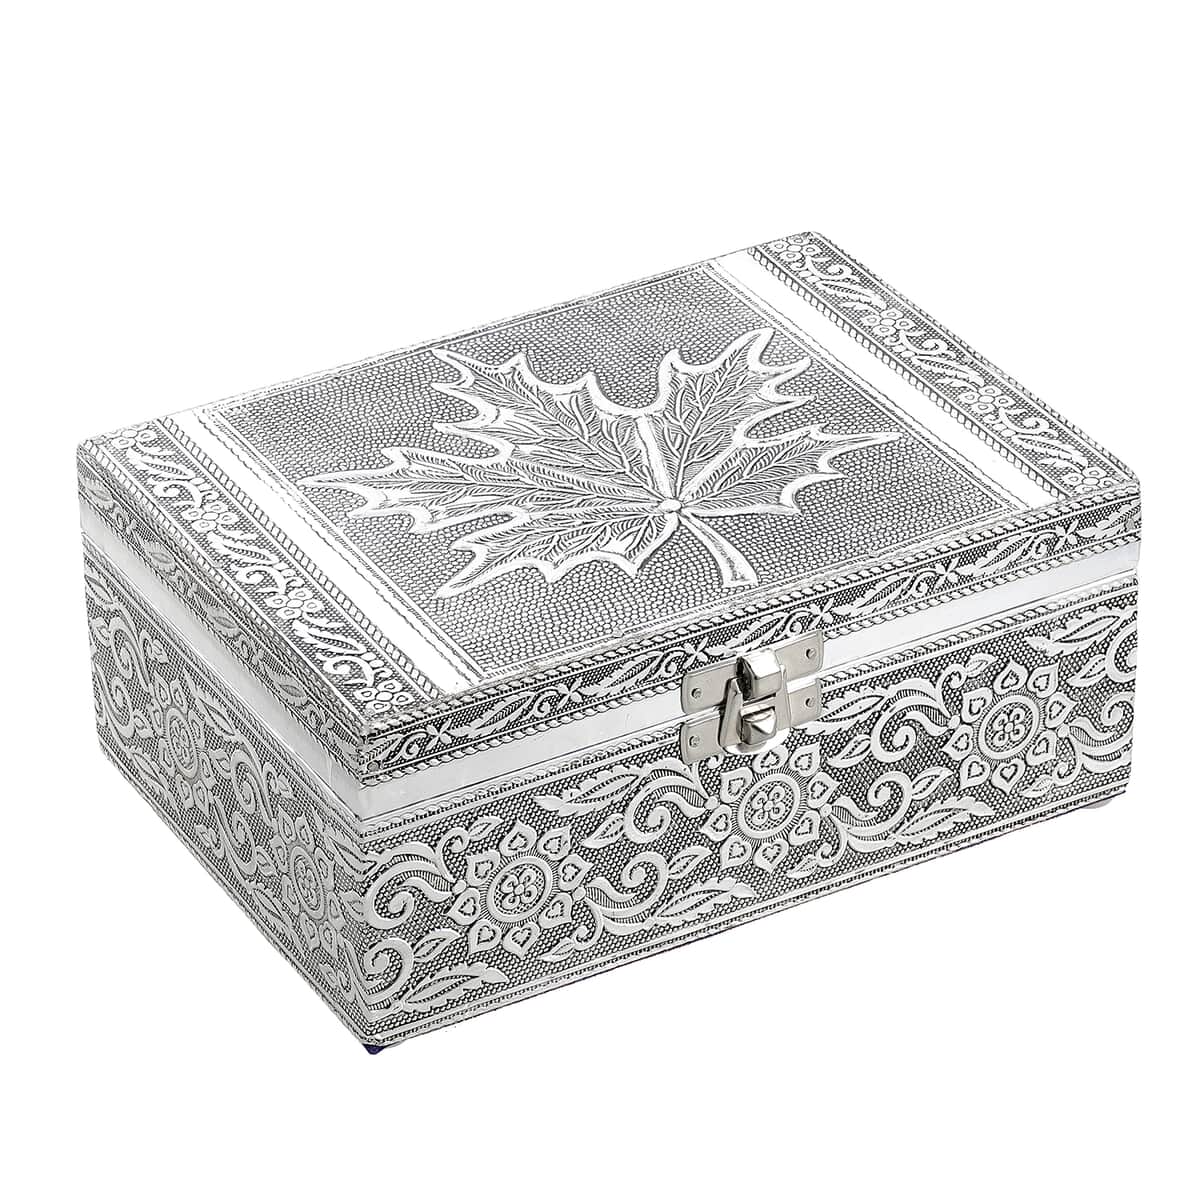 Aluminum Oxidized Maple Leaf Pattern Jewelry Box with Tray (7x5 in) image number 0